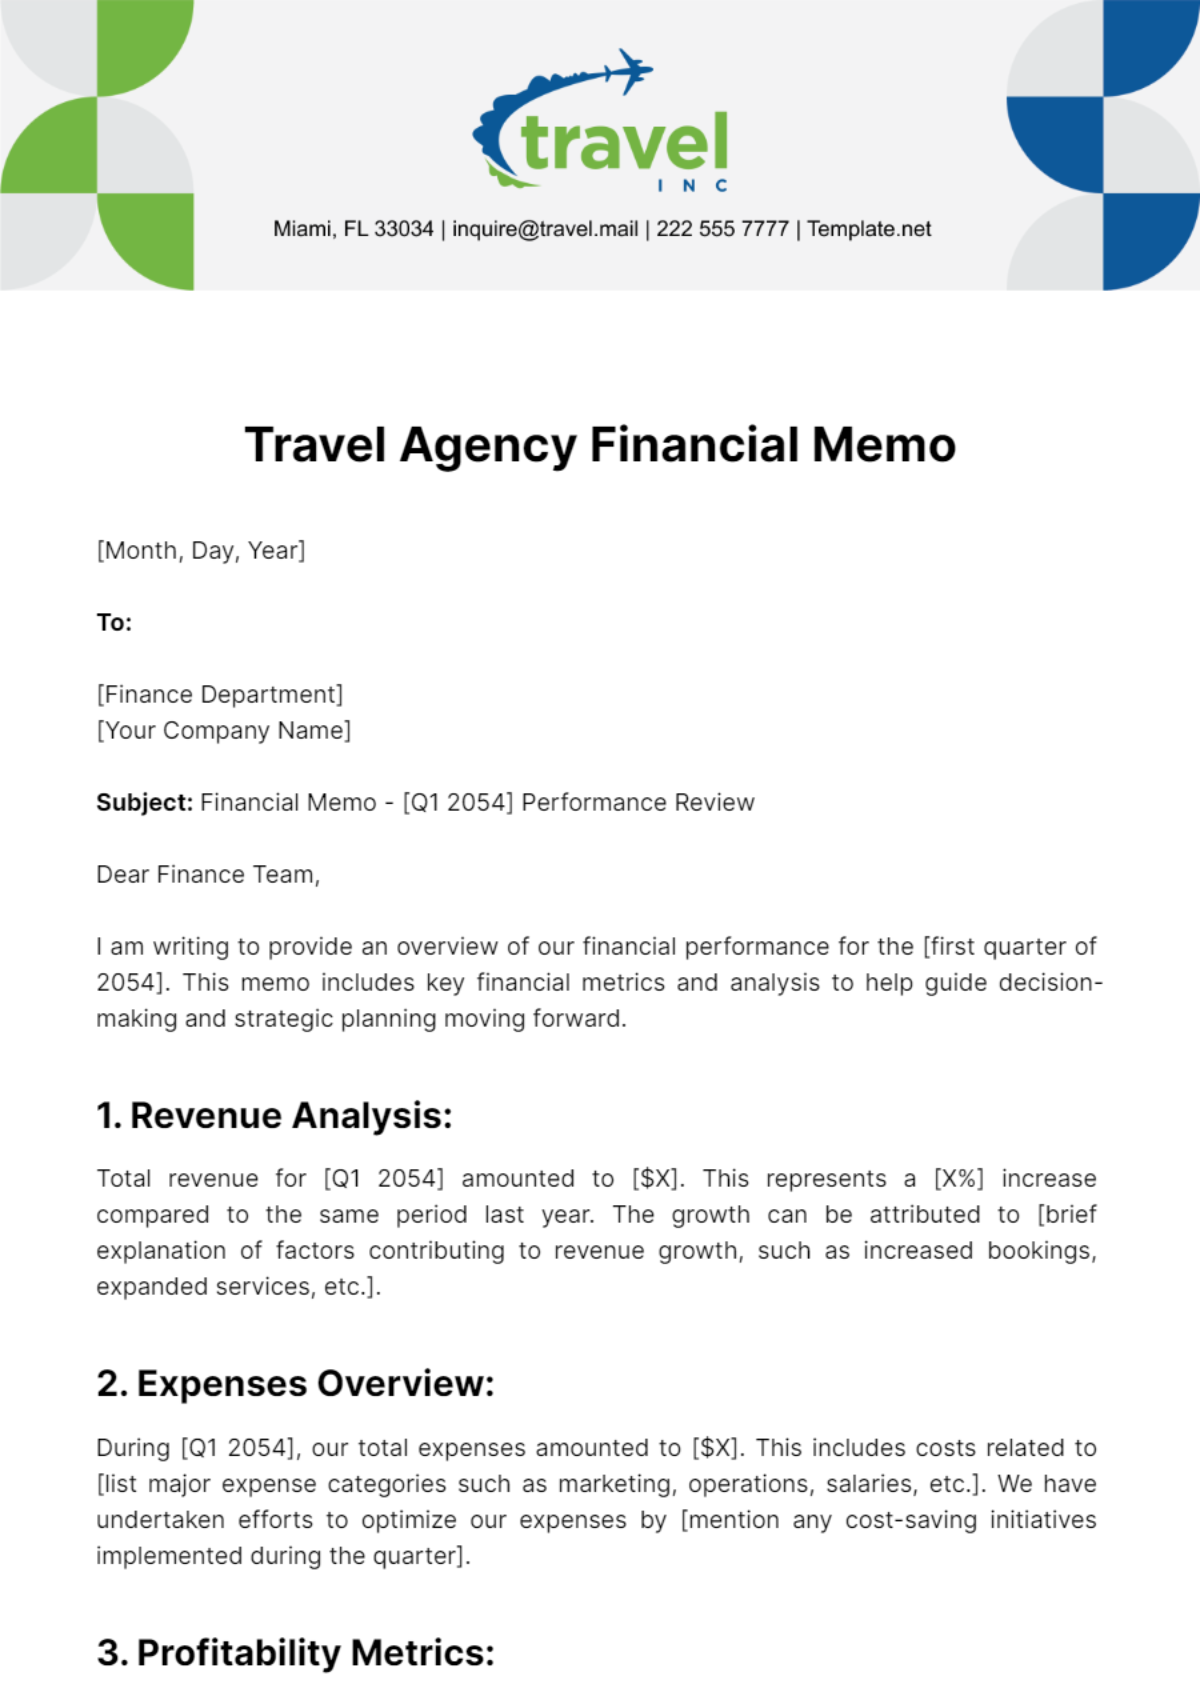 Free Travel Agency Financial Memo Template